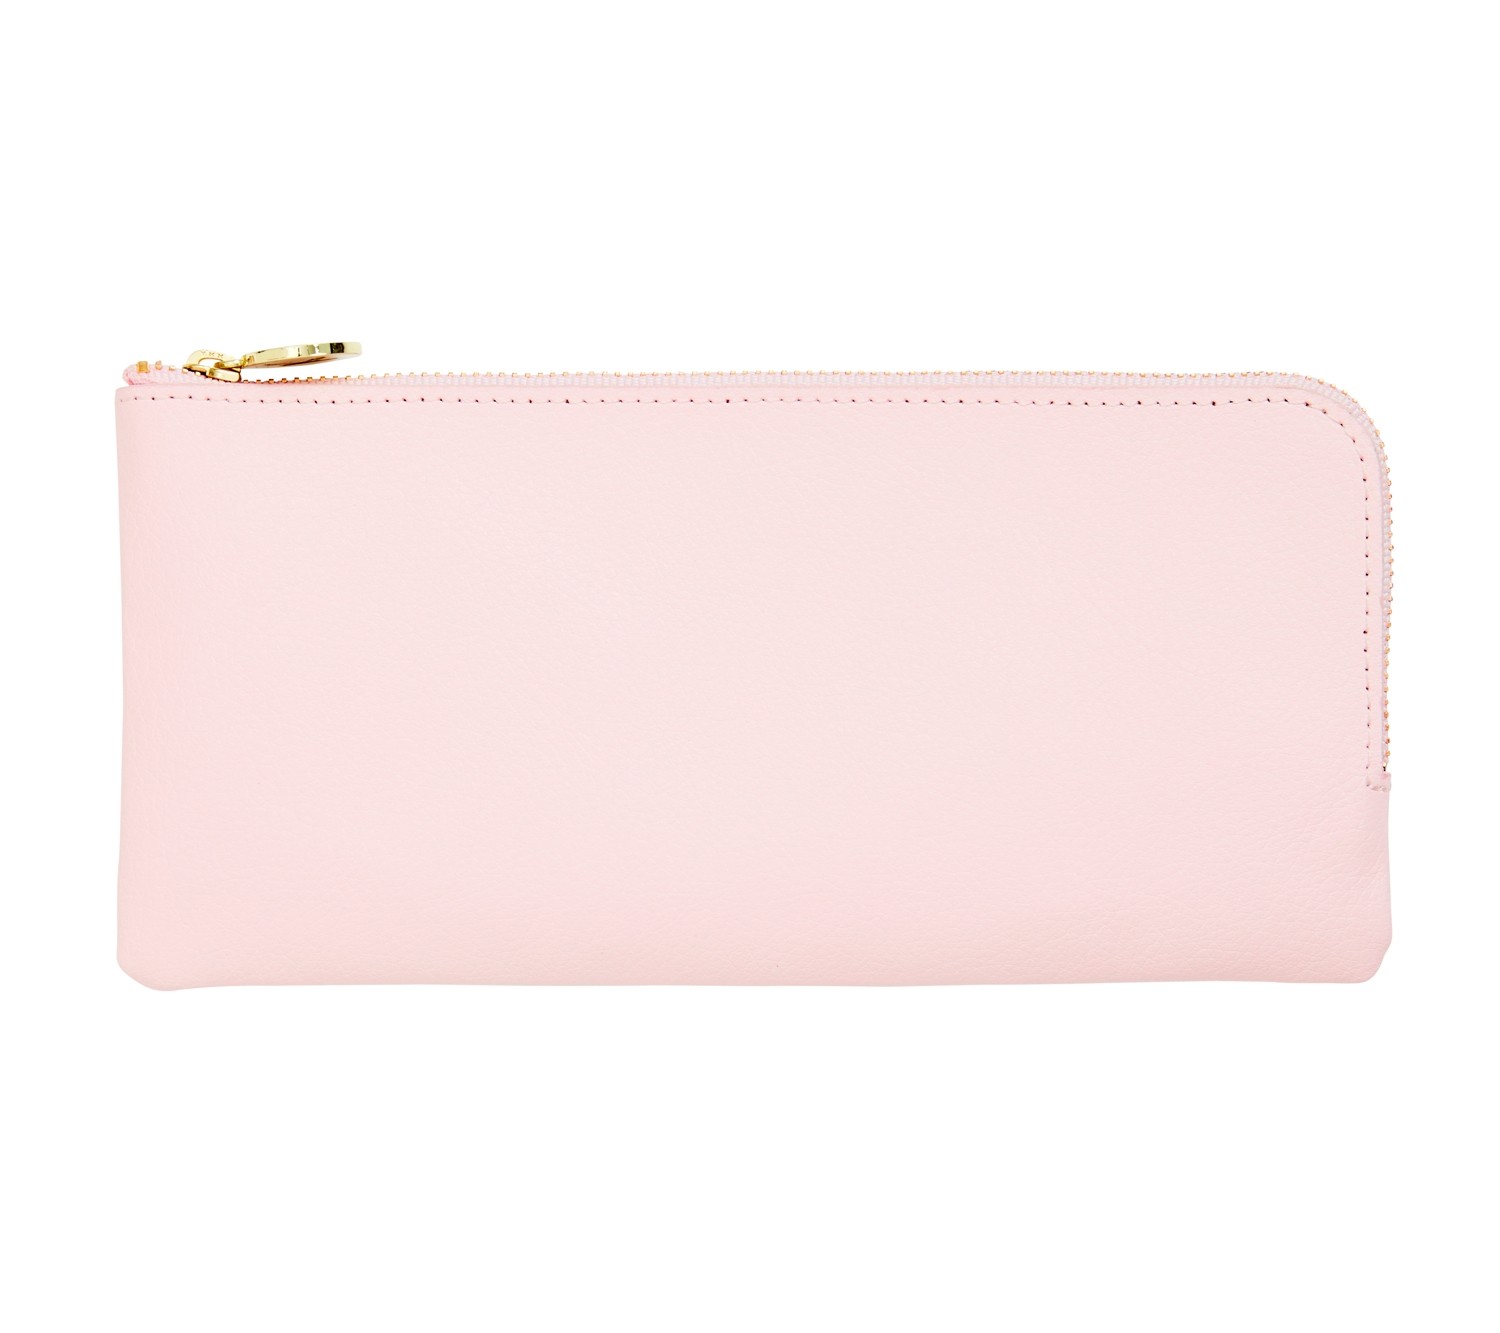 LEATHER PENCIL CASE: PINK